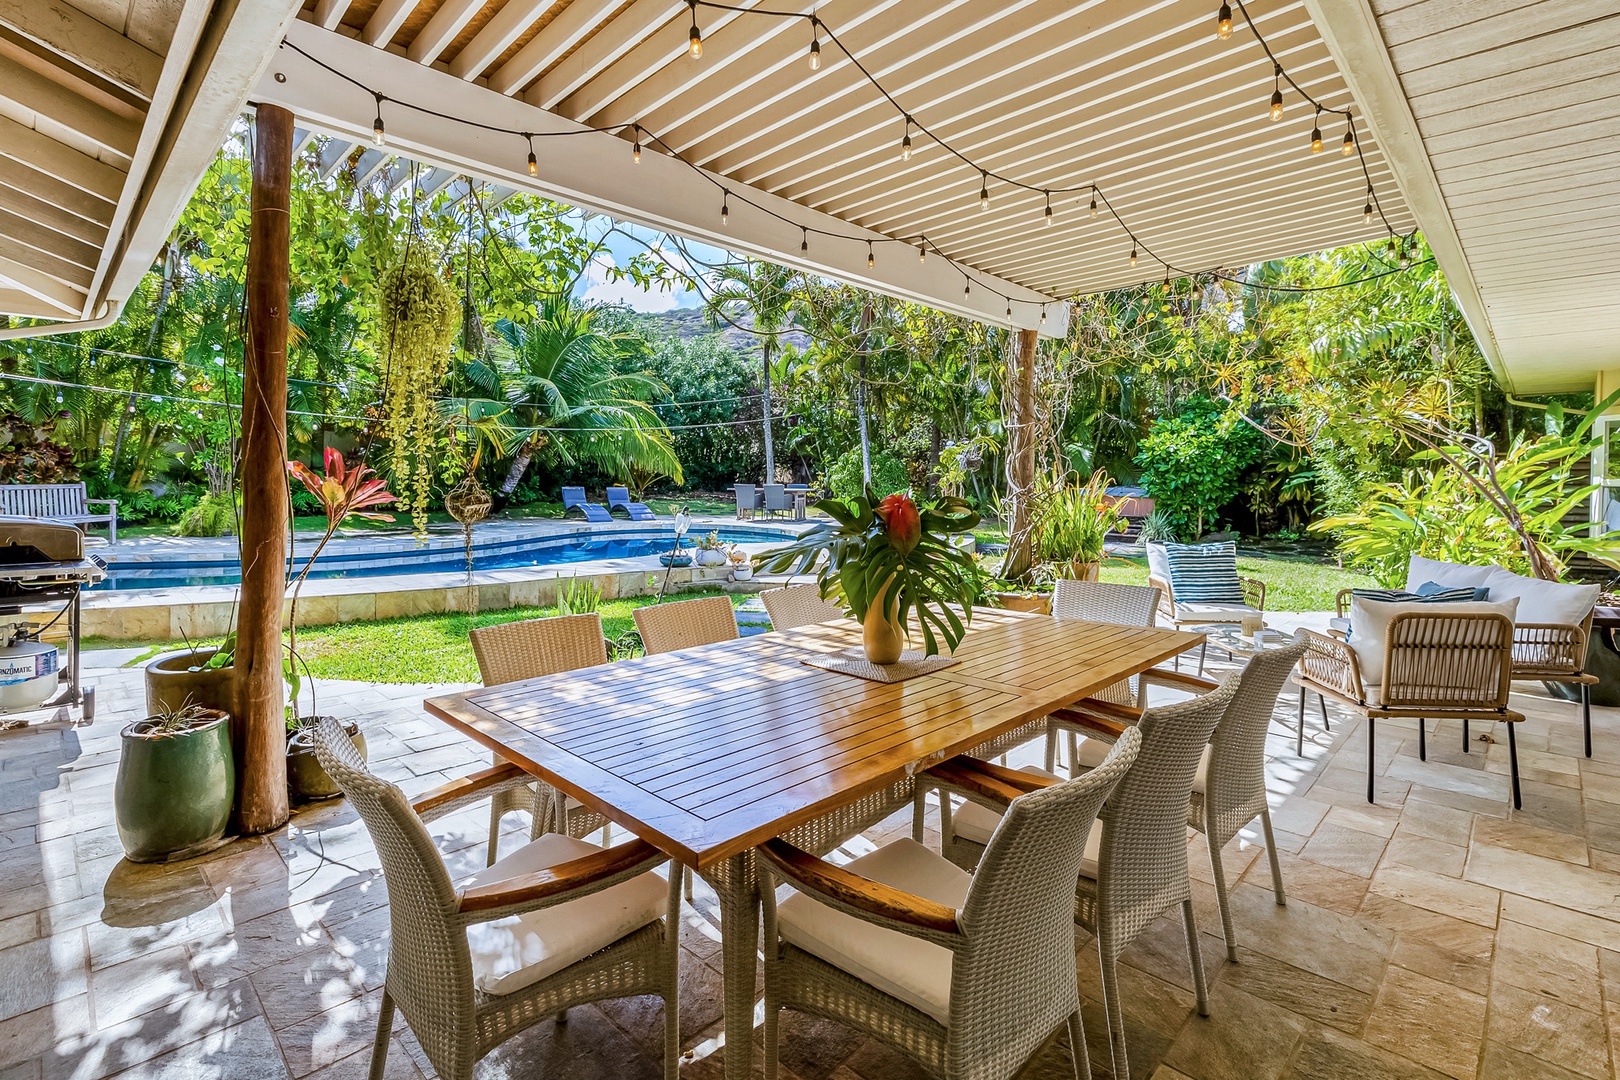 Honolulu Vacation Rentals, Hale Ho'omaha - The covered lanai is the perfect space for outdoor entertainment